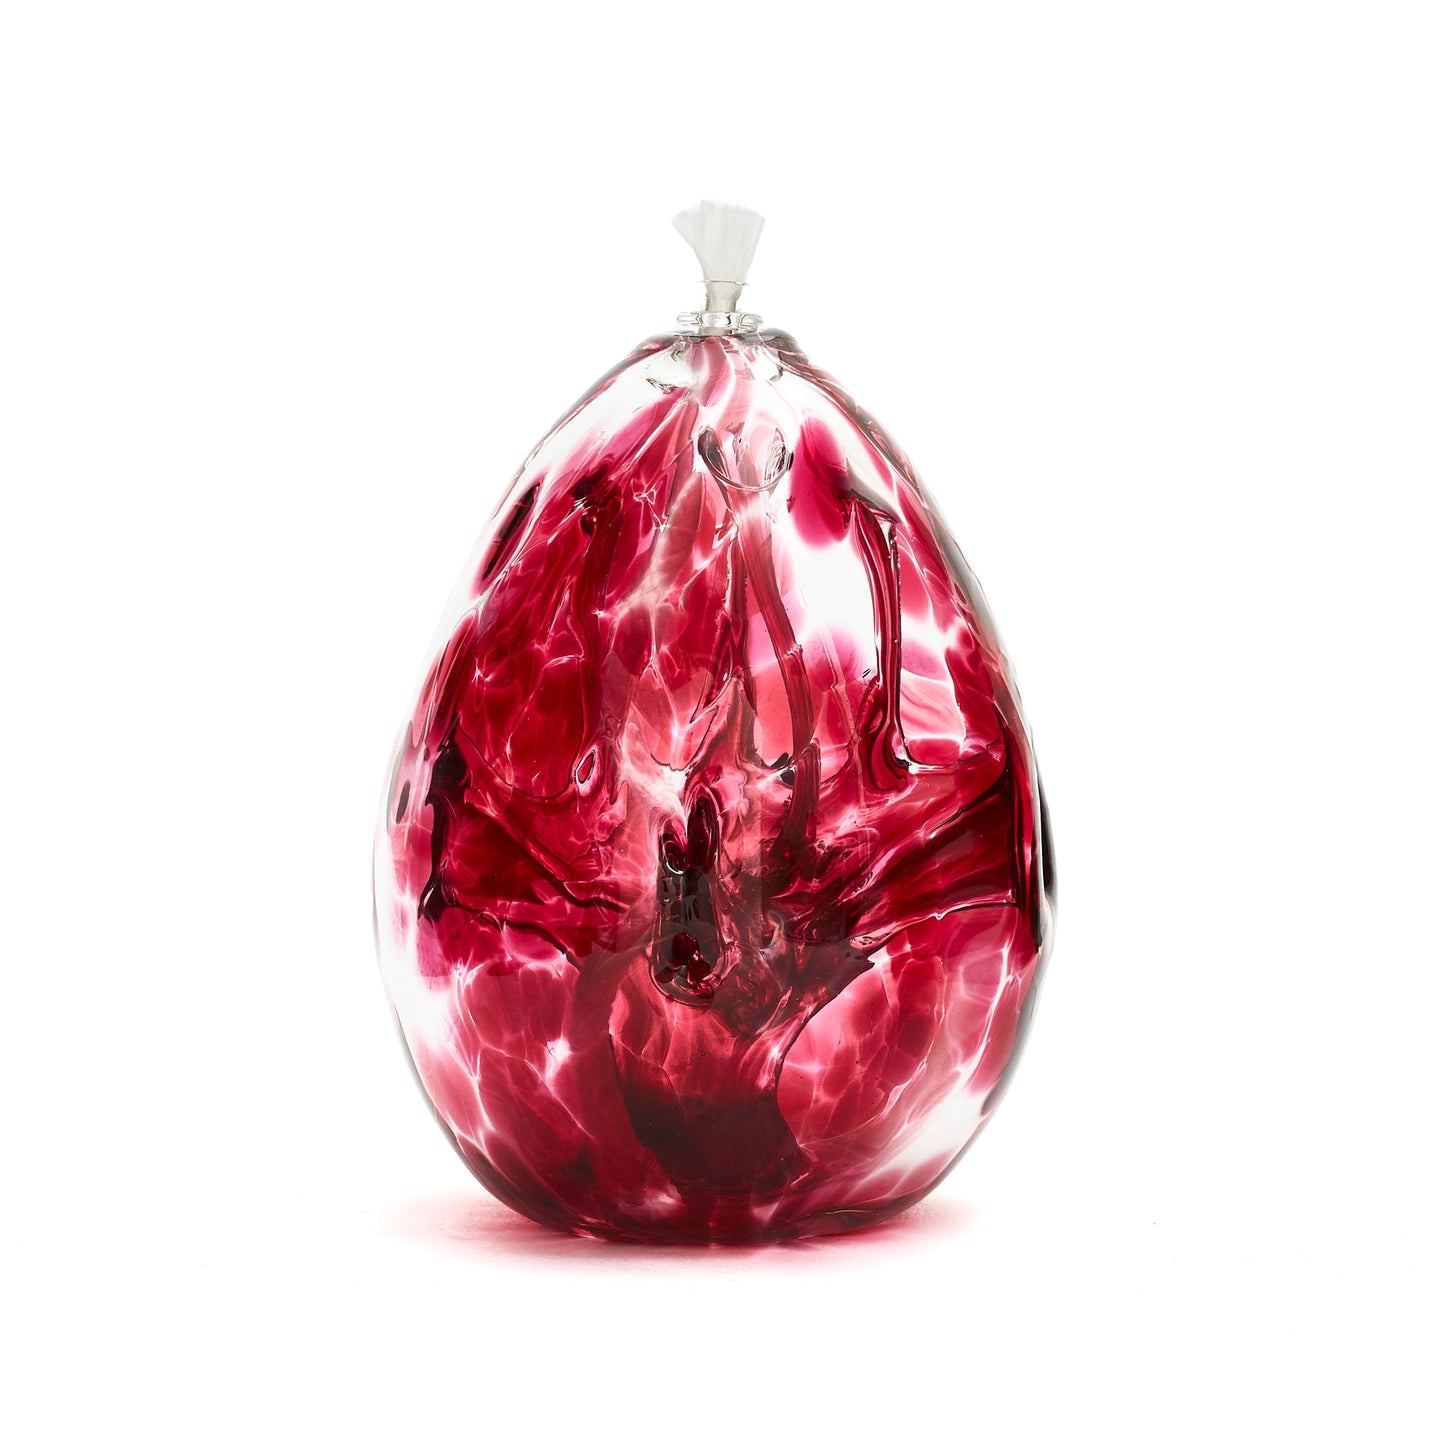 Handmade tall teardrop cranberry glass oil lamp. Made in Ontario Canada by Gray Art Glass.